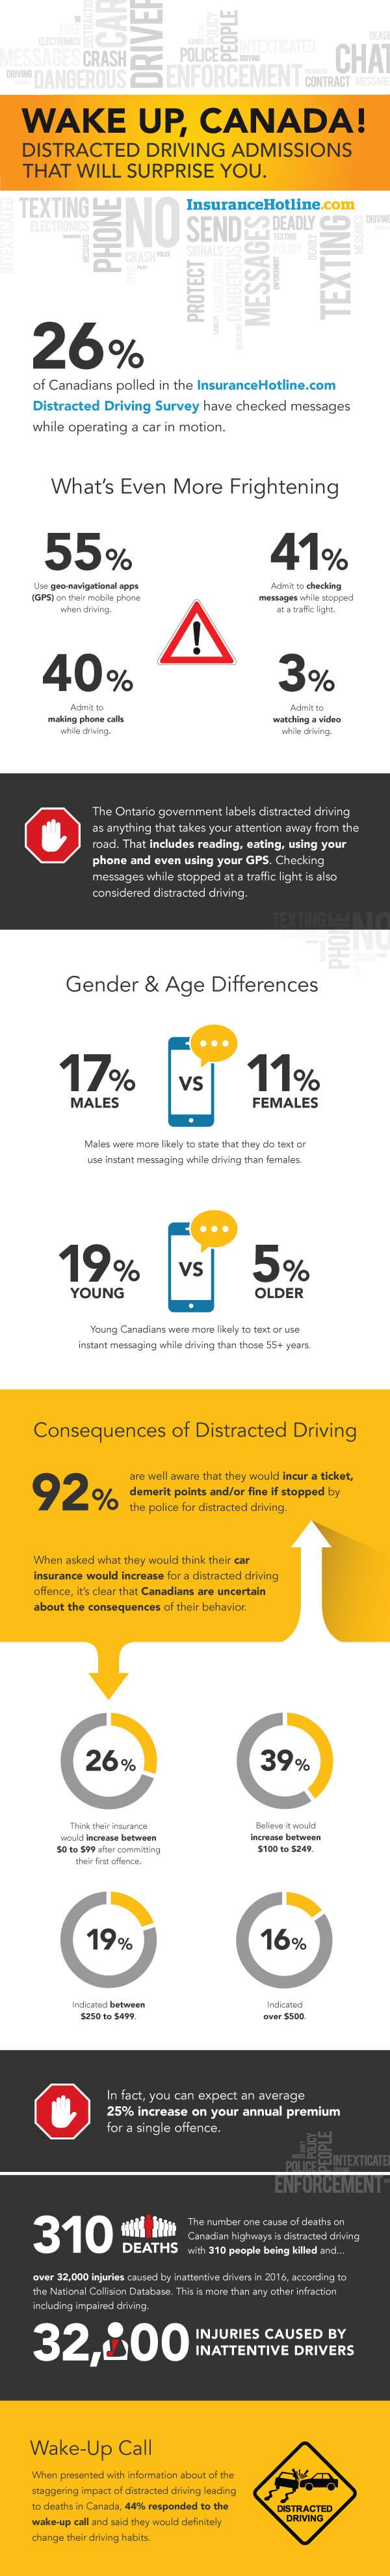 IH-007_2019_Distracted_Driving_Creative_Infographic_FINAL